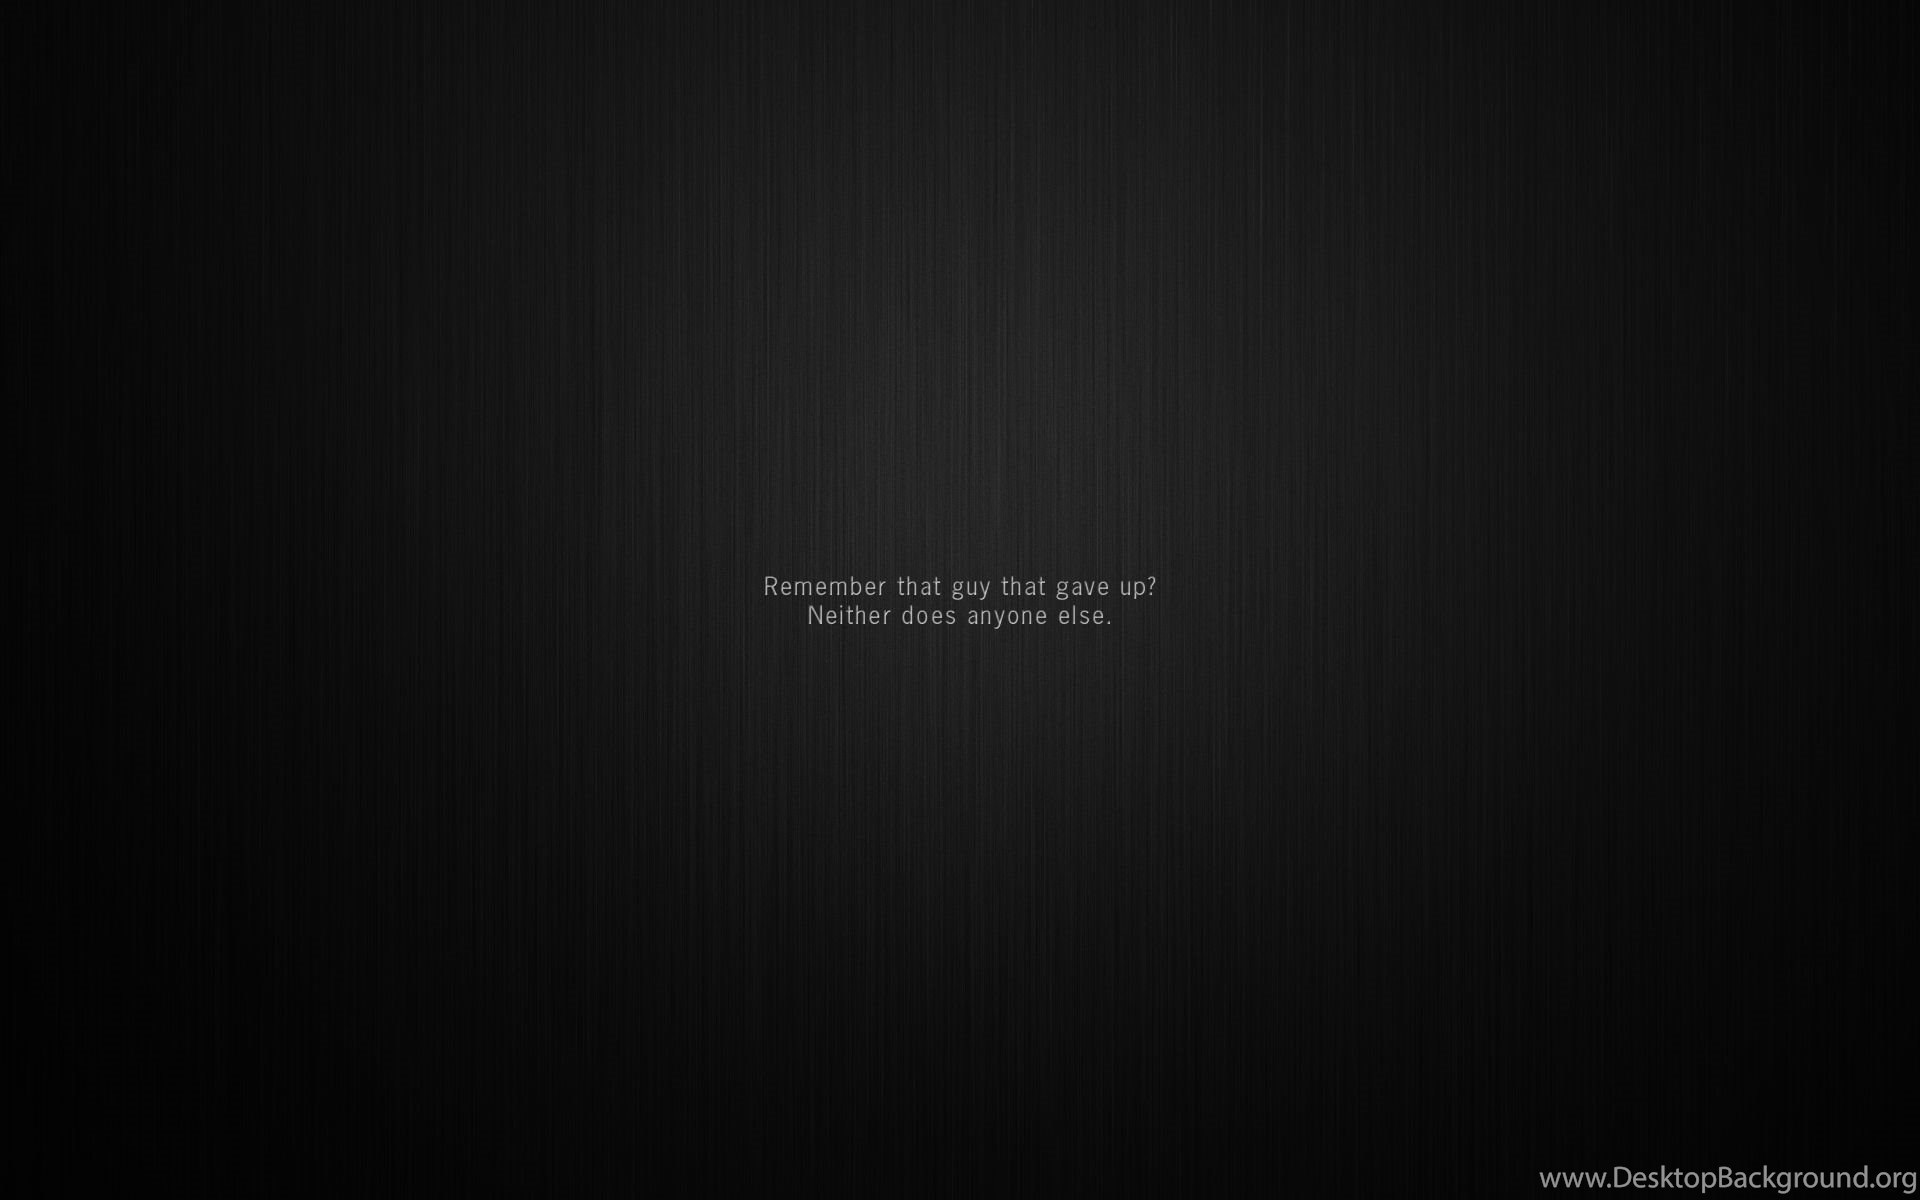 Laptop Background With Quotes Inspiring. QuotesGram Desktop Background